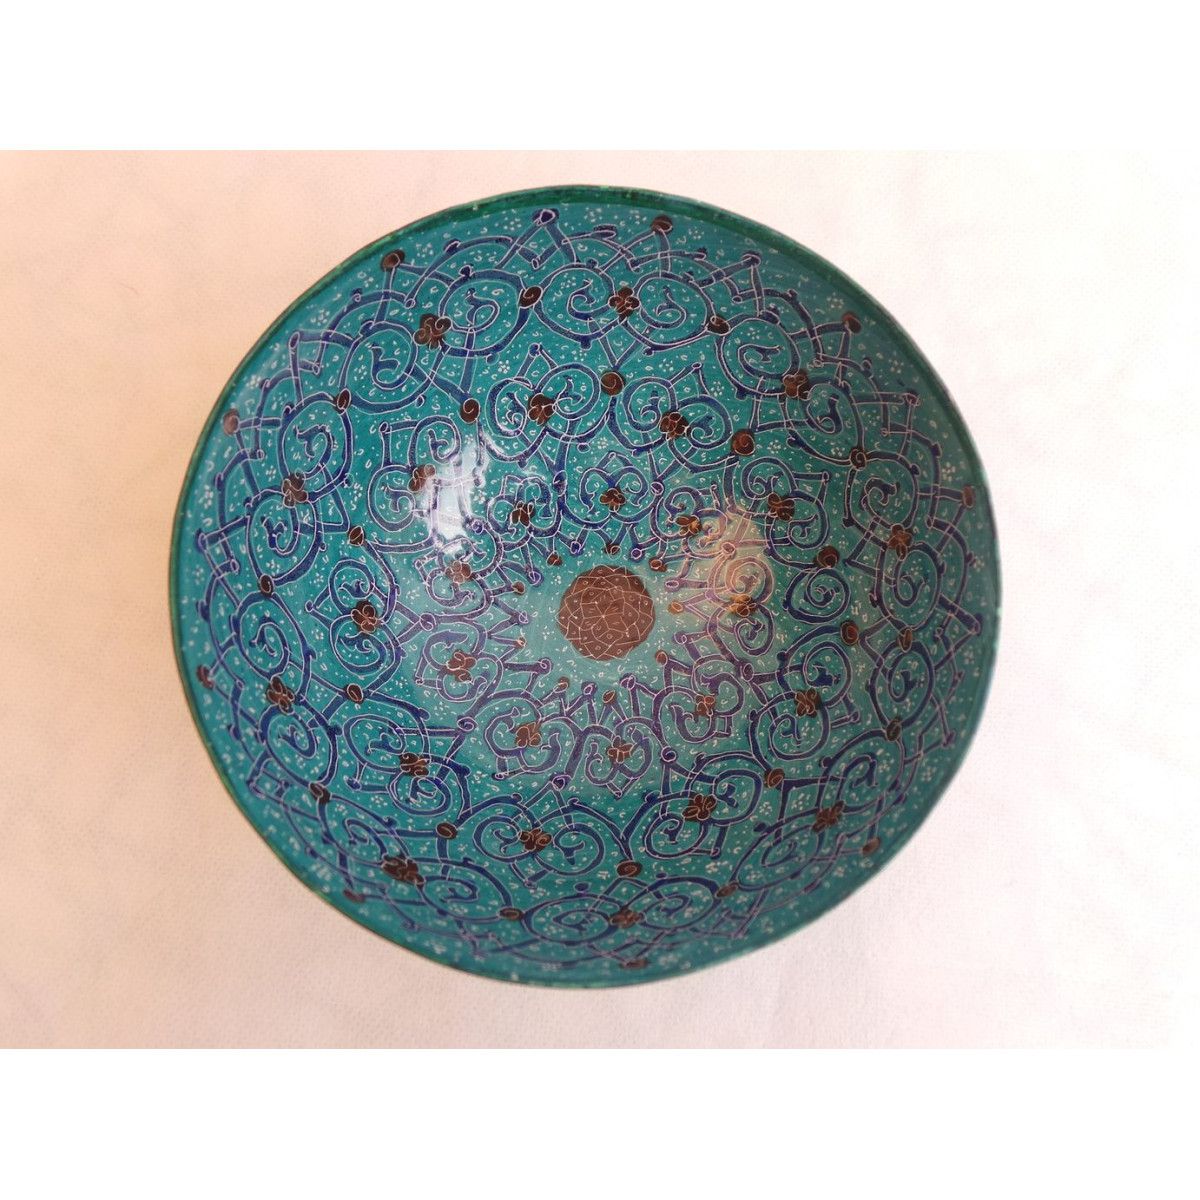 Enamel on Copper Candy/Nuts Bowl - HE3008-Persian Handicrafts